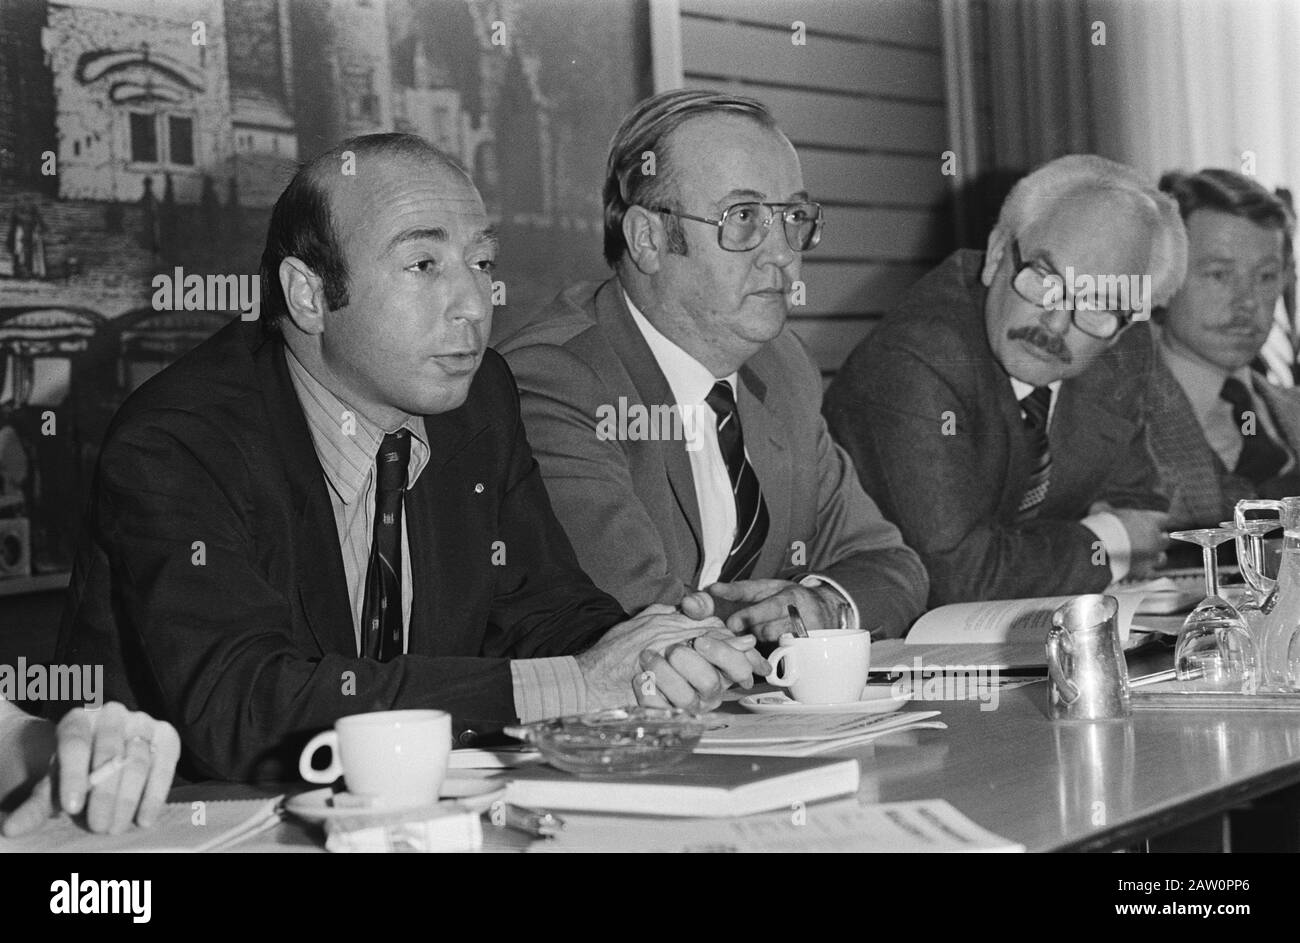 New political party Realists 81 presents election during press conference in Date: March 19, 1981 Keywords: press conferences Person Name: Hans Knoop, Quasten Stock Photo